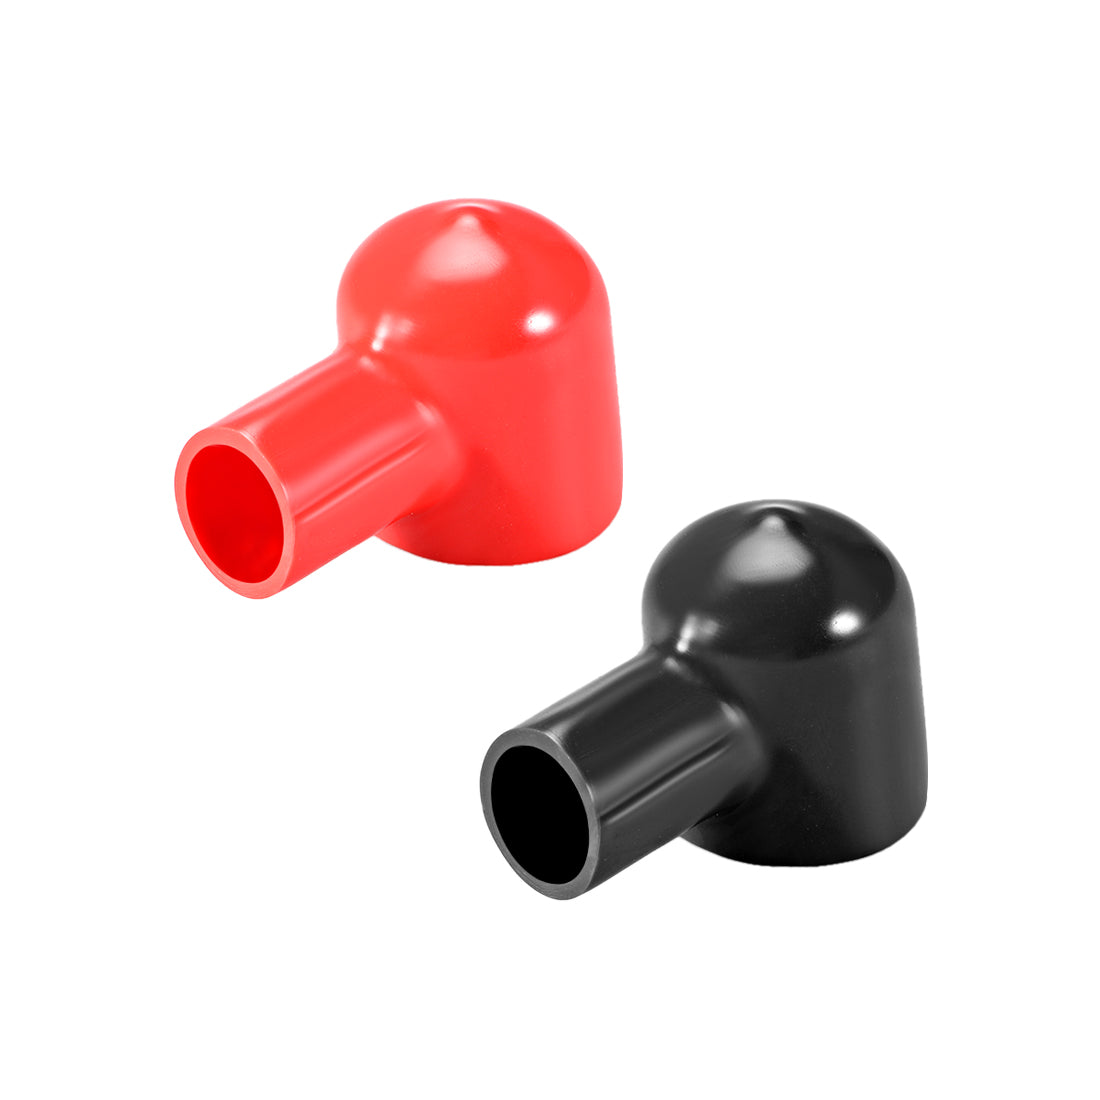 uxcell Uxcell Battery Terminal Insulating Rubber Protector Covers for 20mm Terminal 12mm Cable Red Black 1 Pair